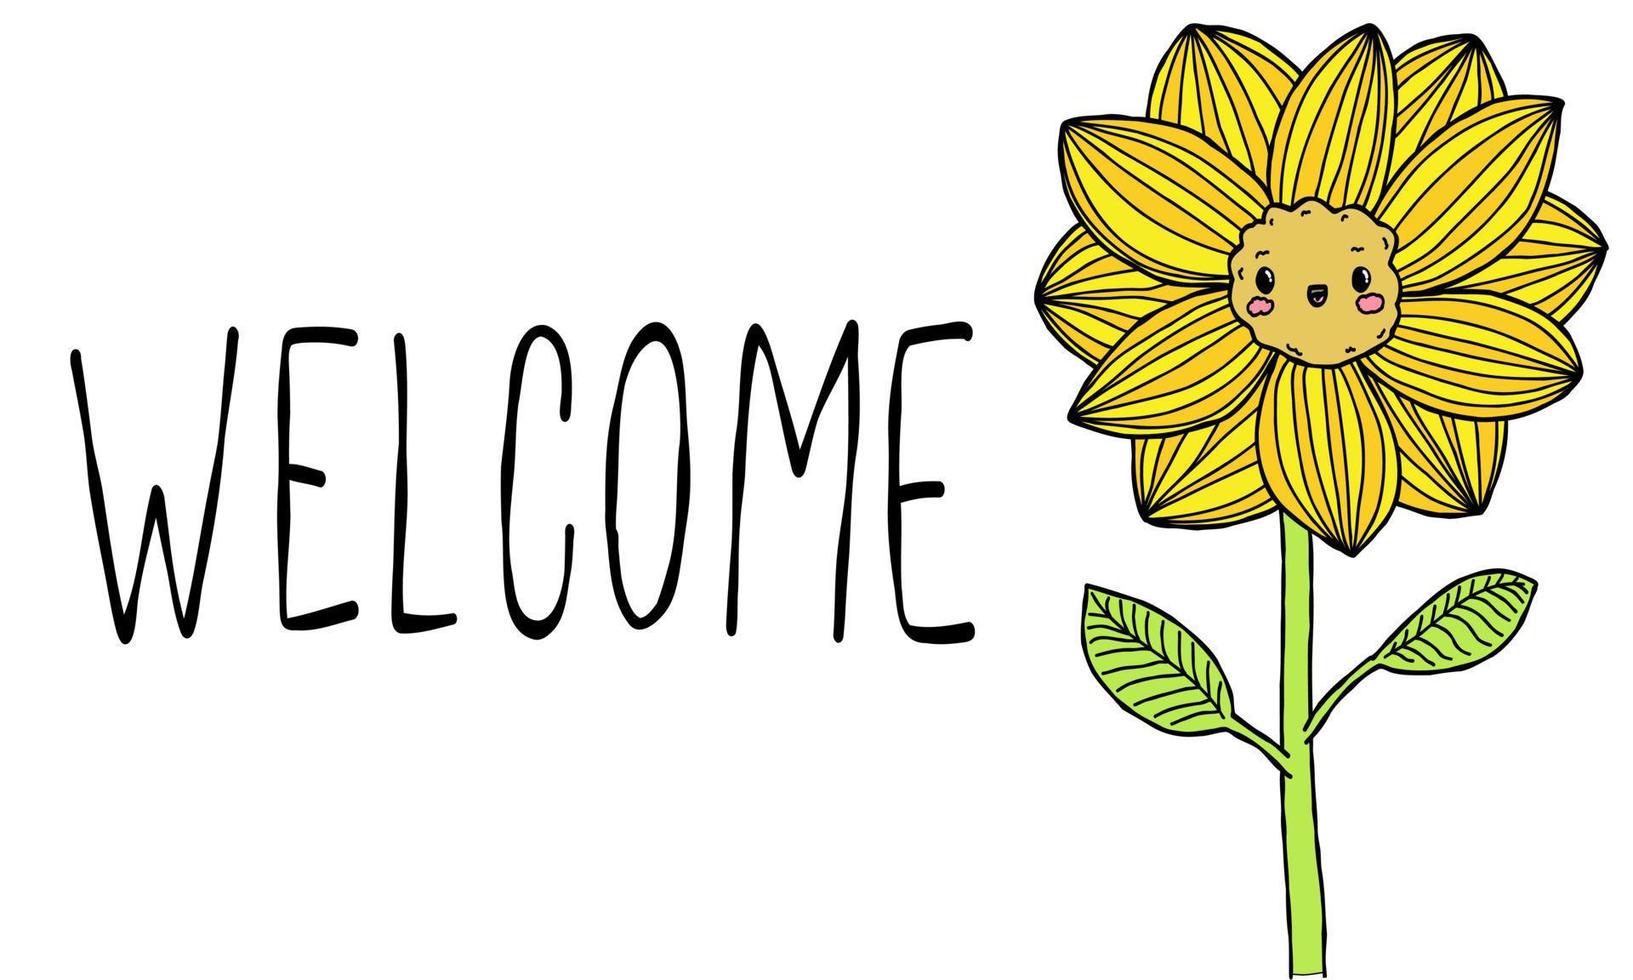 Postcard vector illustration eps 10. Baby print, banner, brochure, happy sunflower with smiling face. Welcome text with flower, isolated on white background.